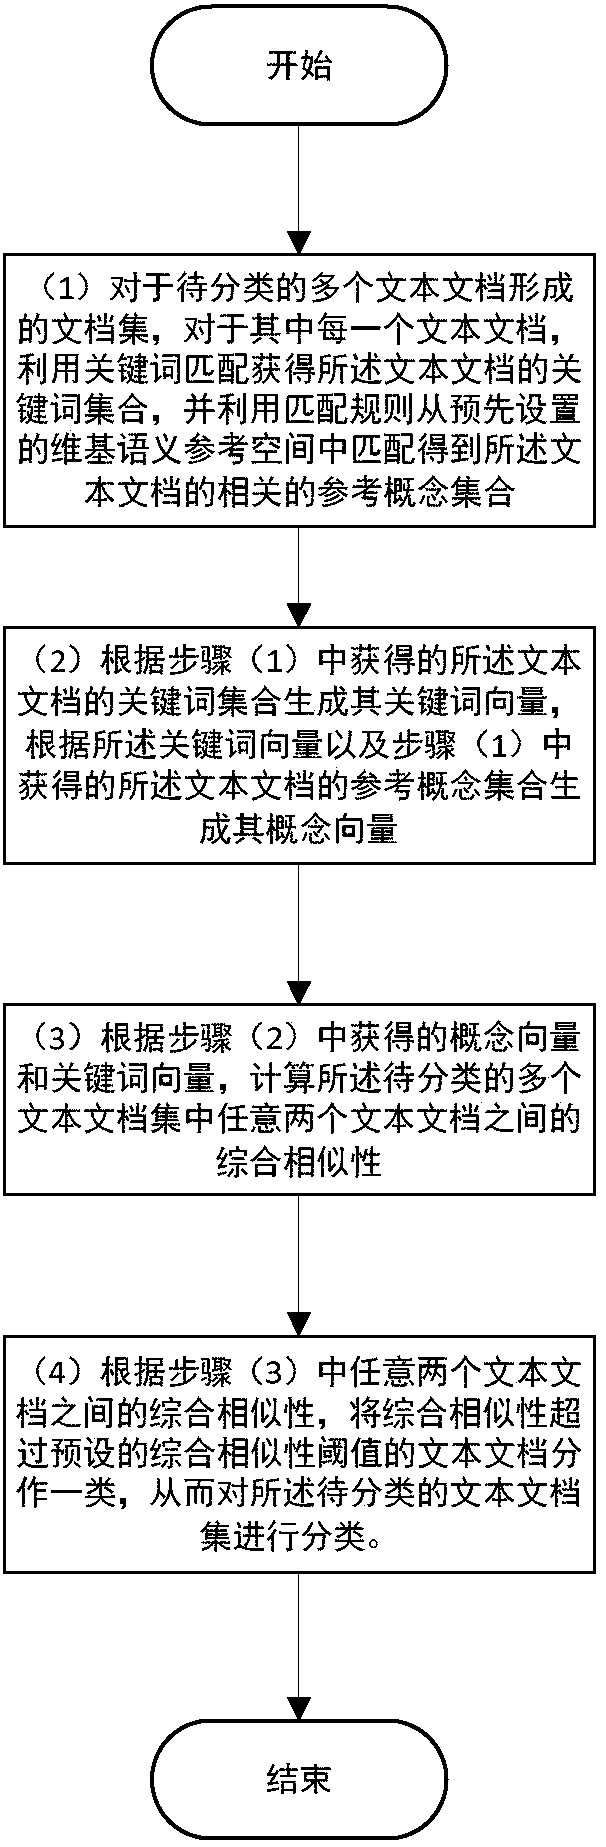 Wiki semantic matching-based document classification method and system